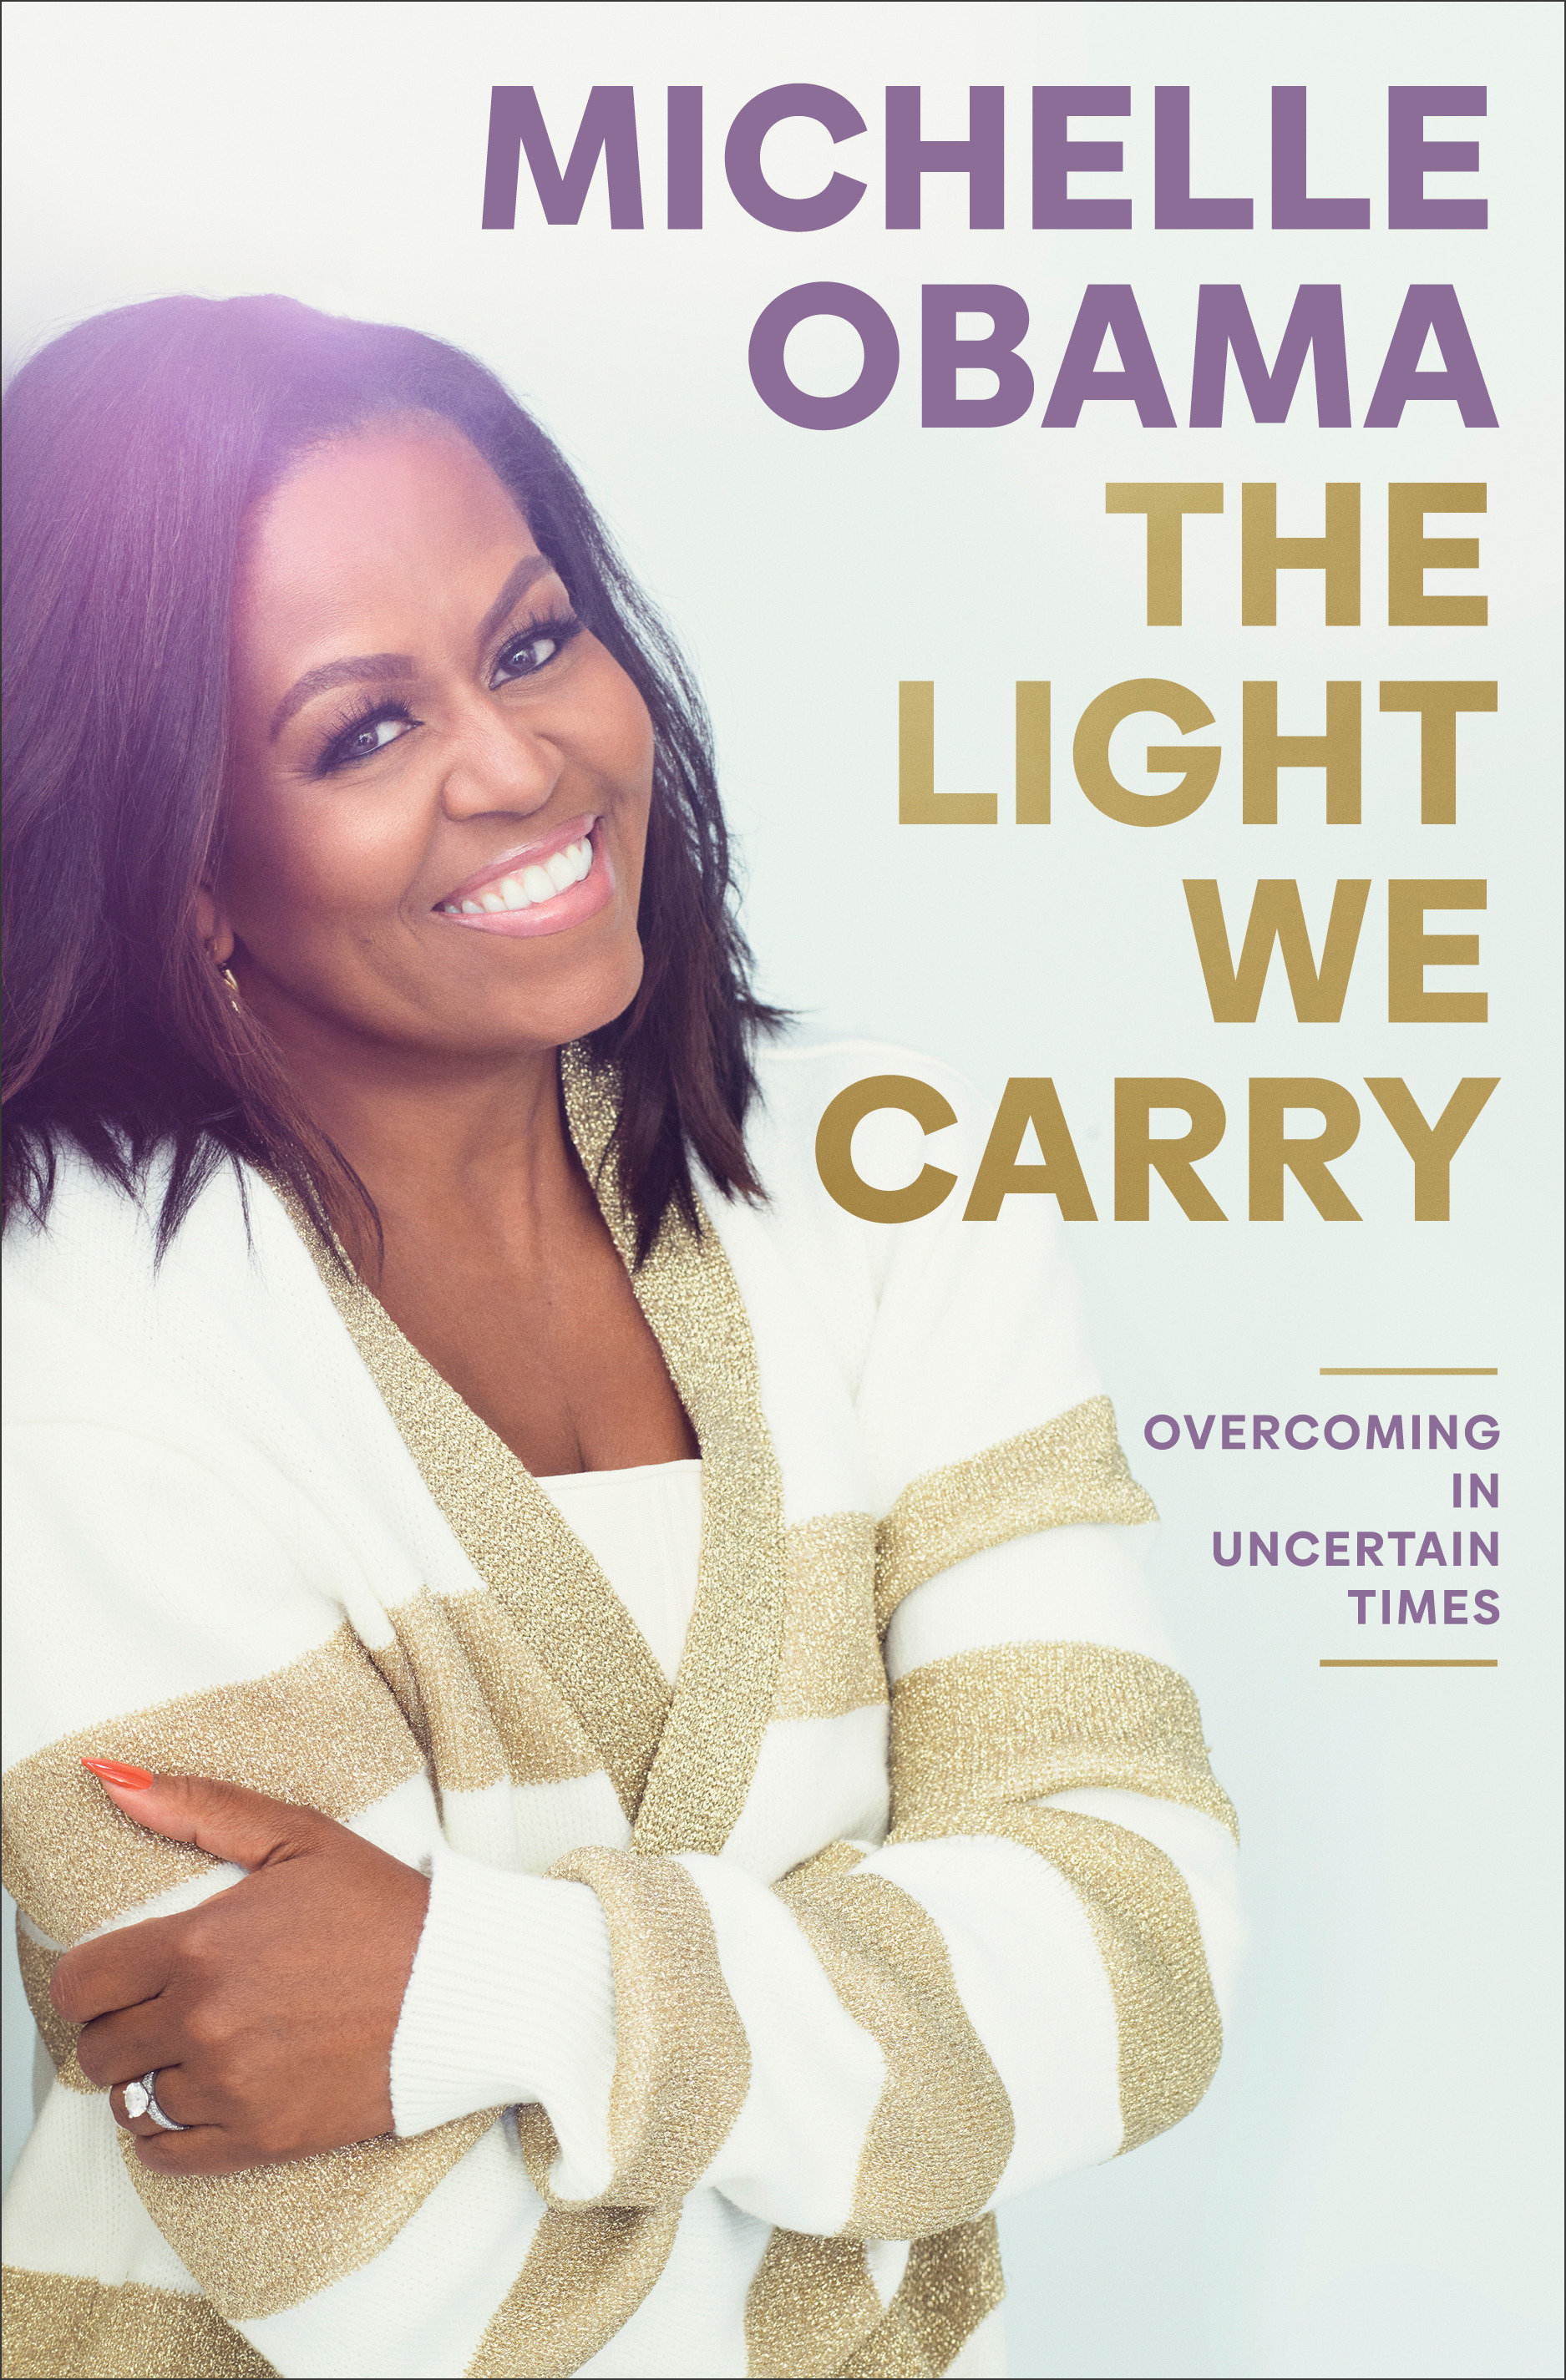 The Light We Carry (Hardcover Book)